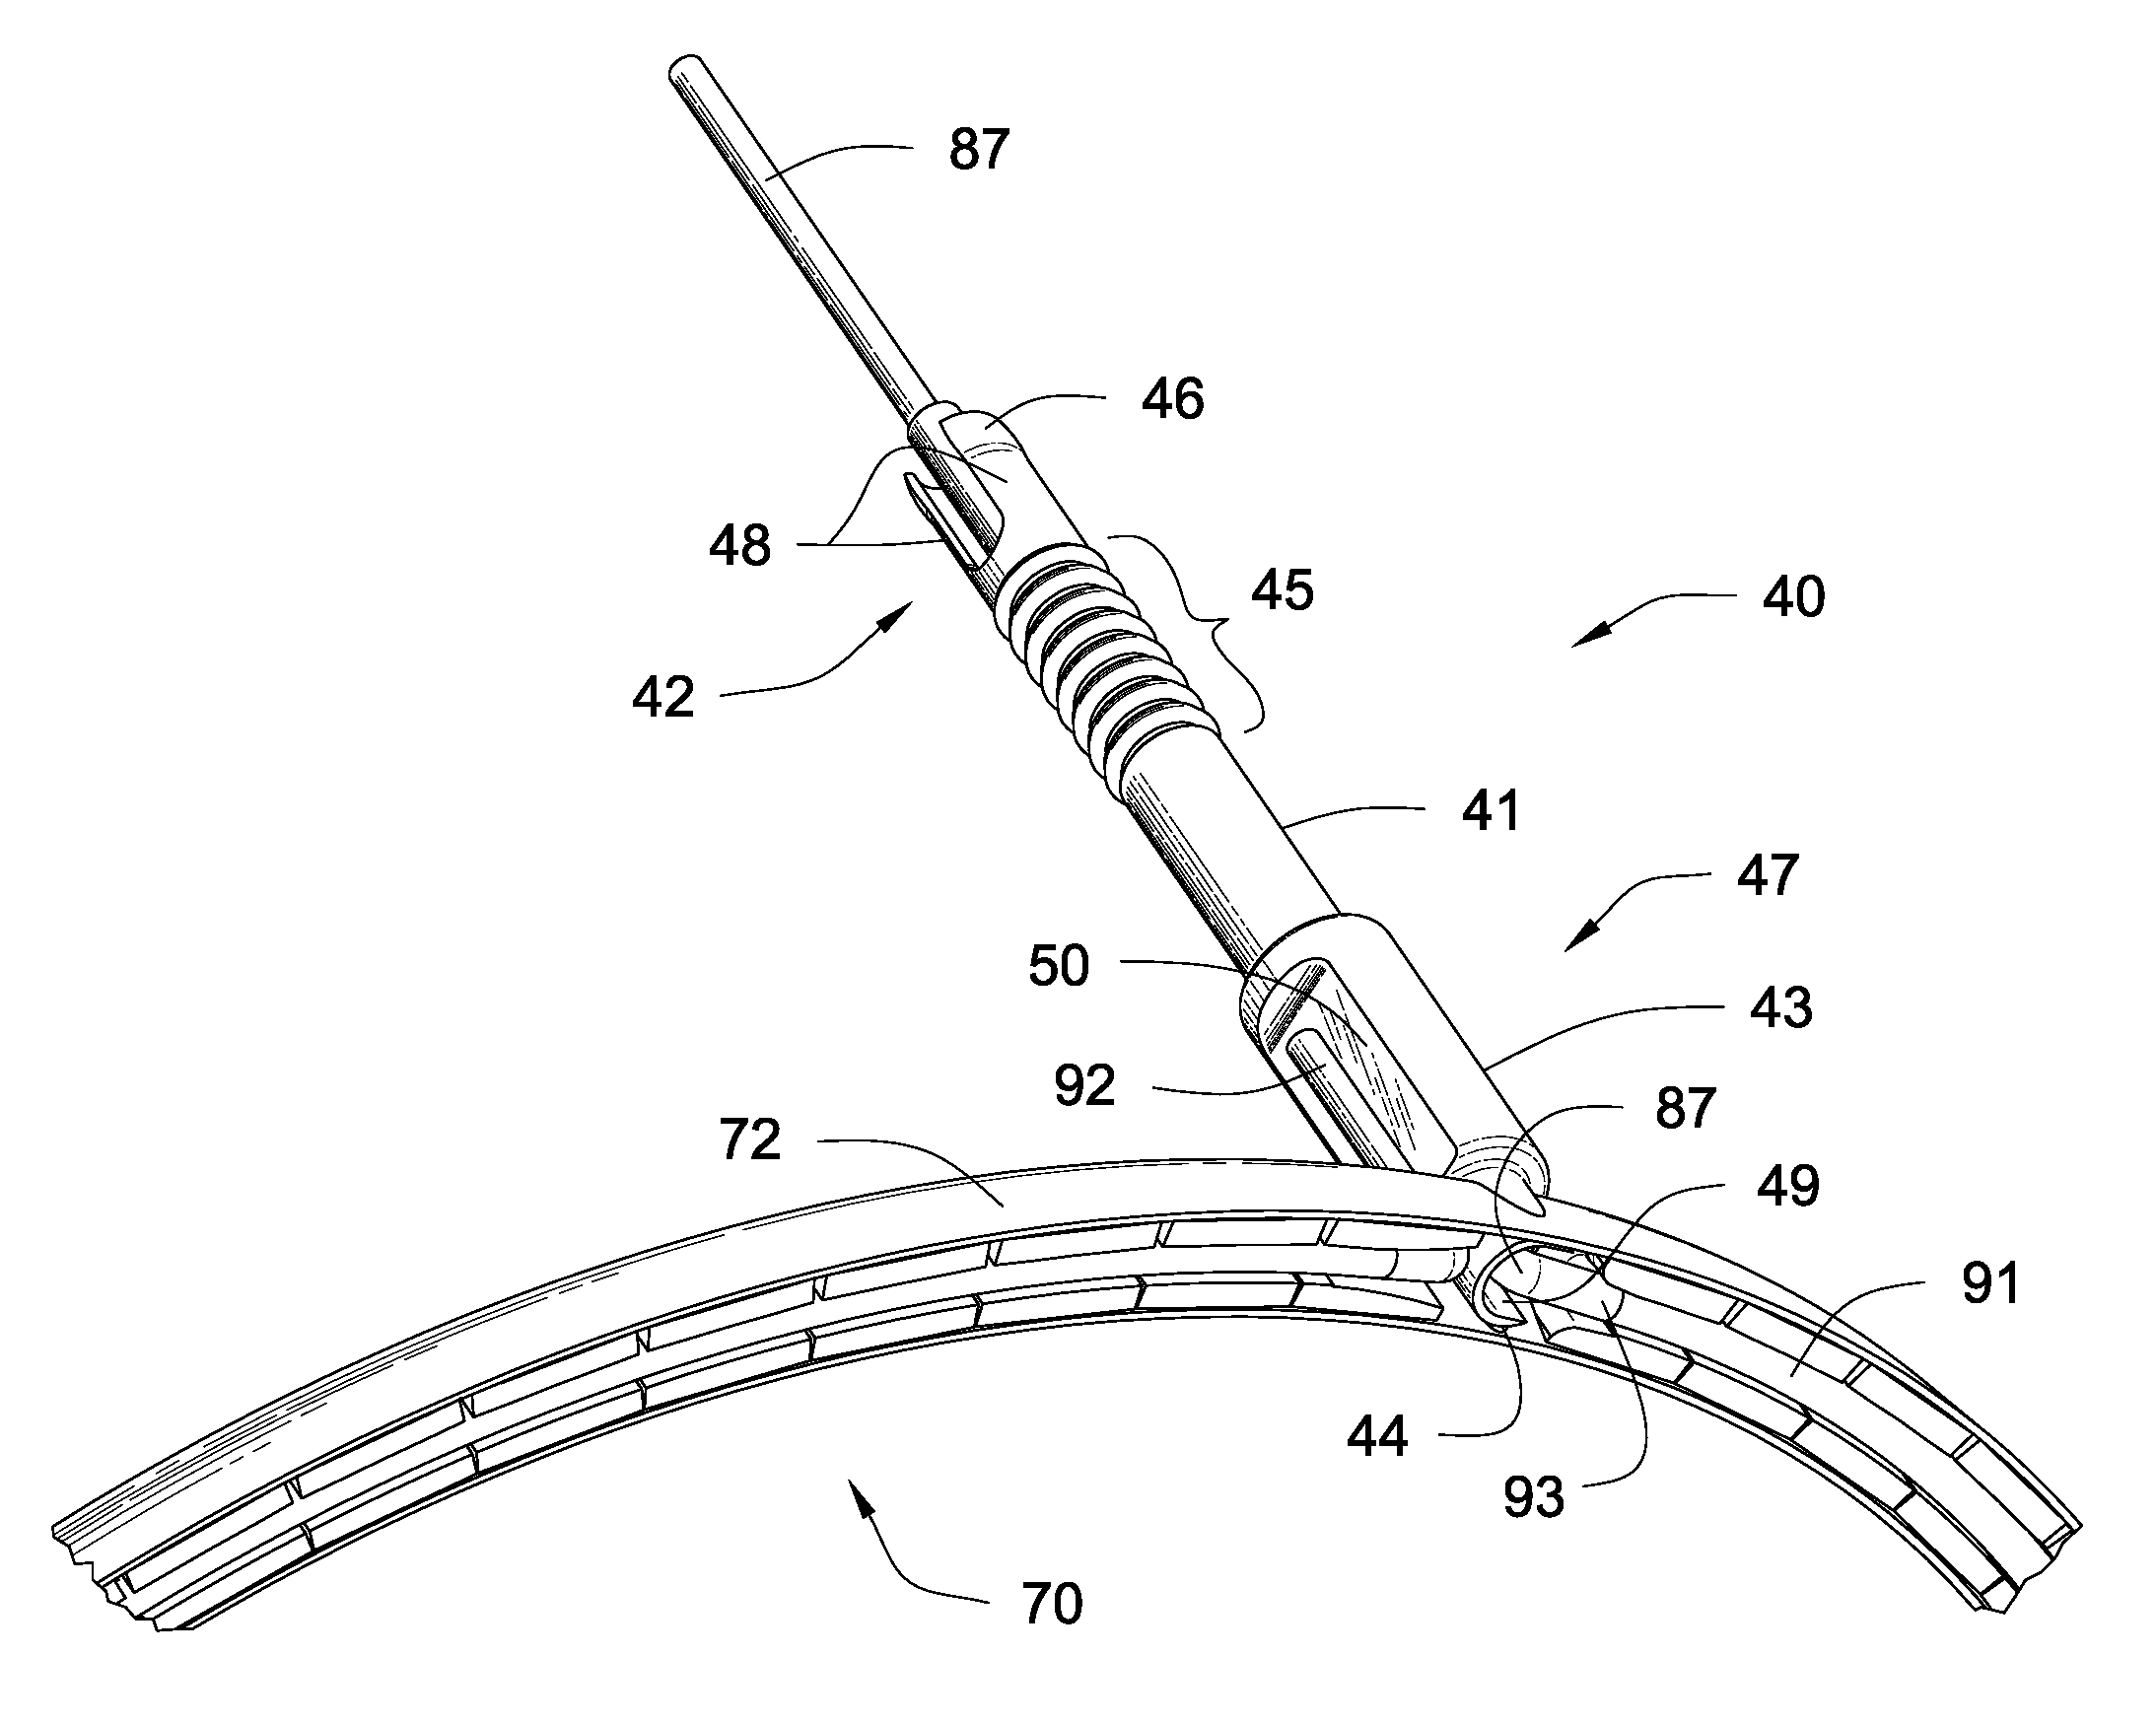 Internal coaxial cable electrical connector for use in downhole tools